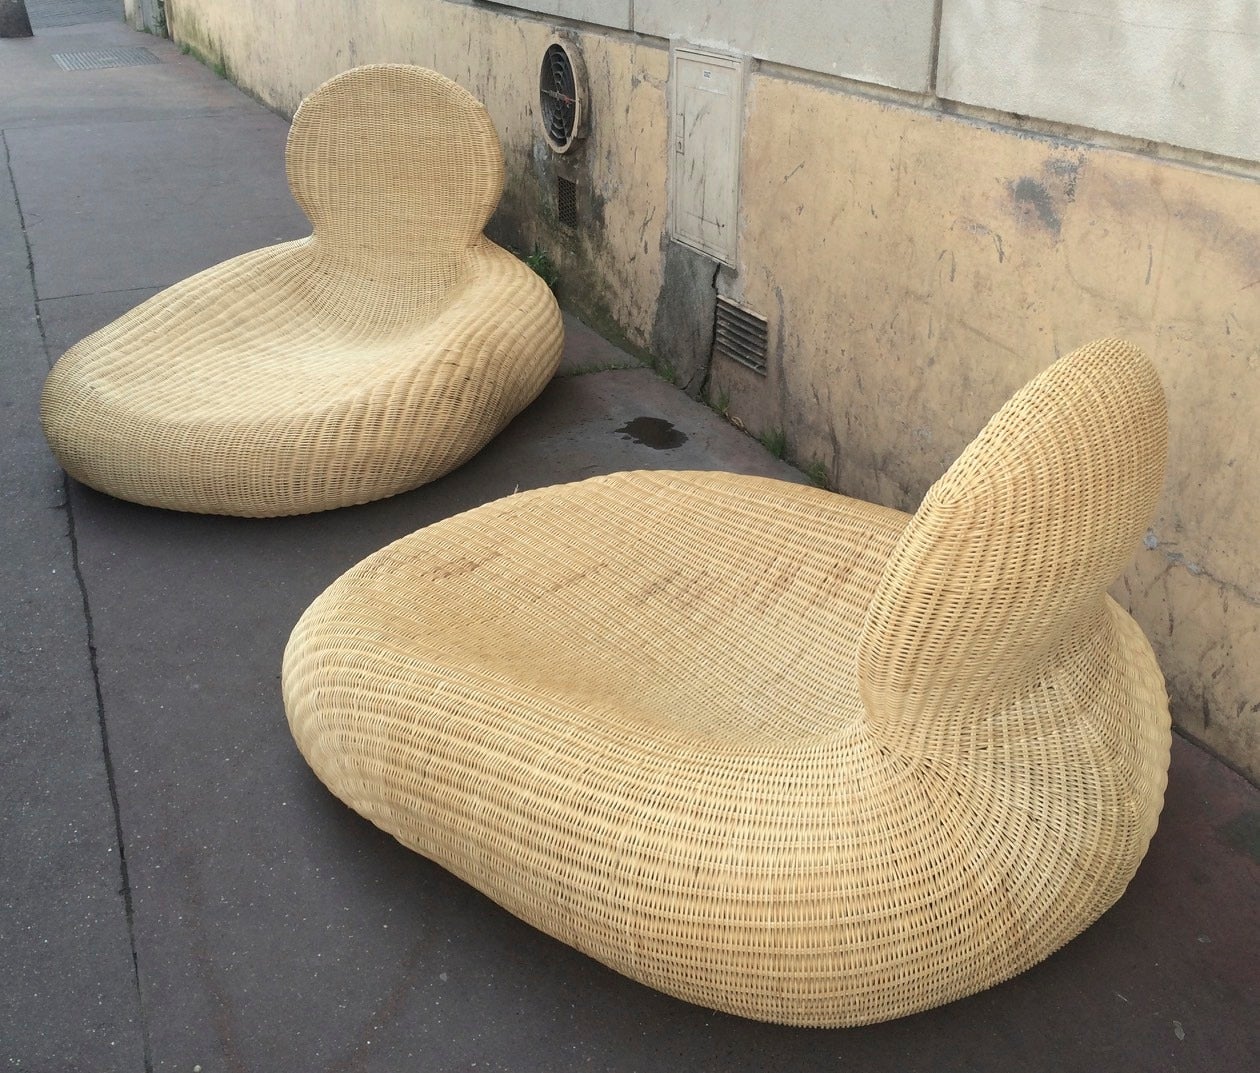 Awesome pair of anthropomorphic rattan lounge chairs.